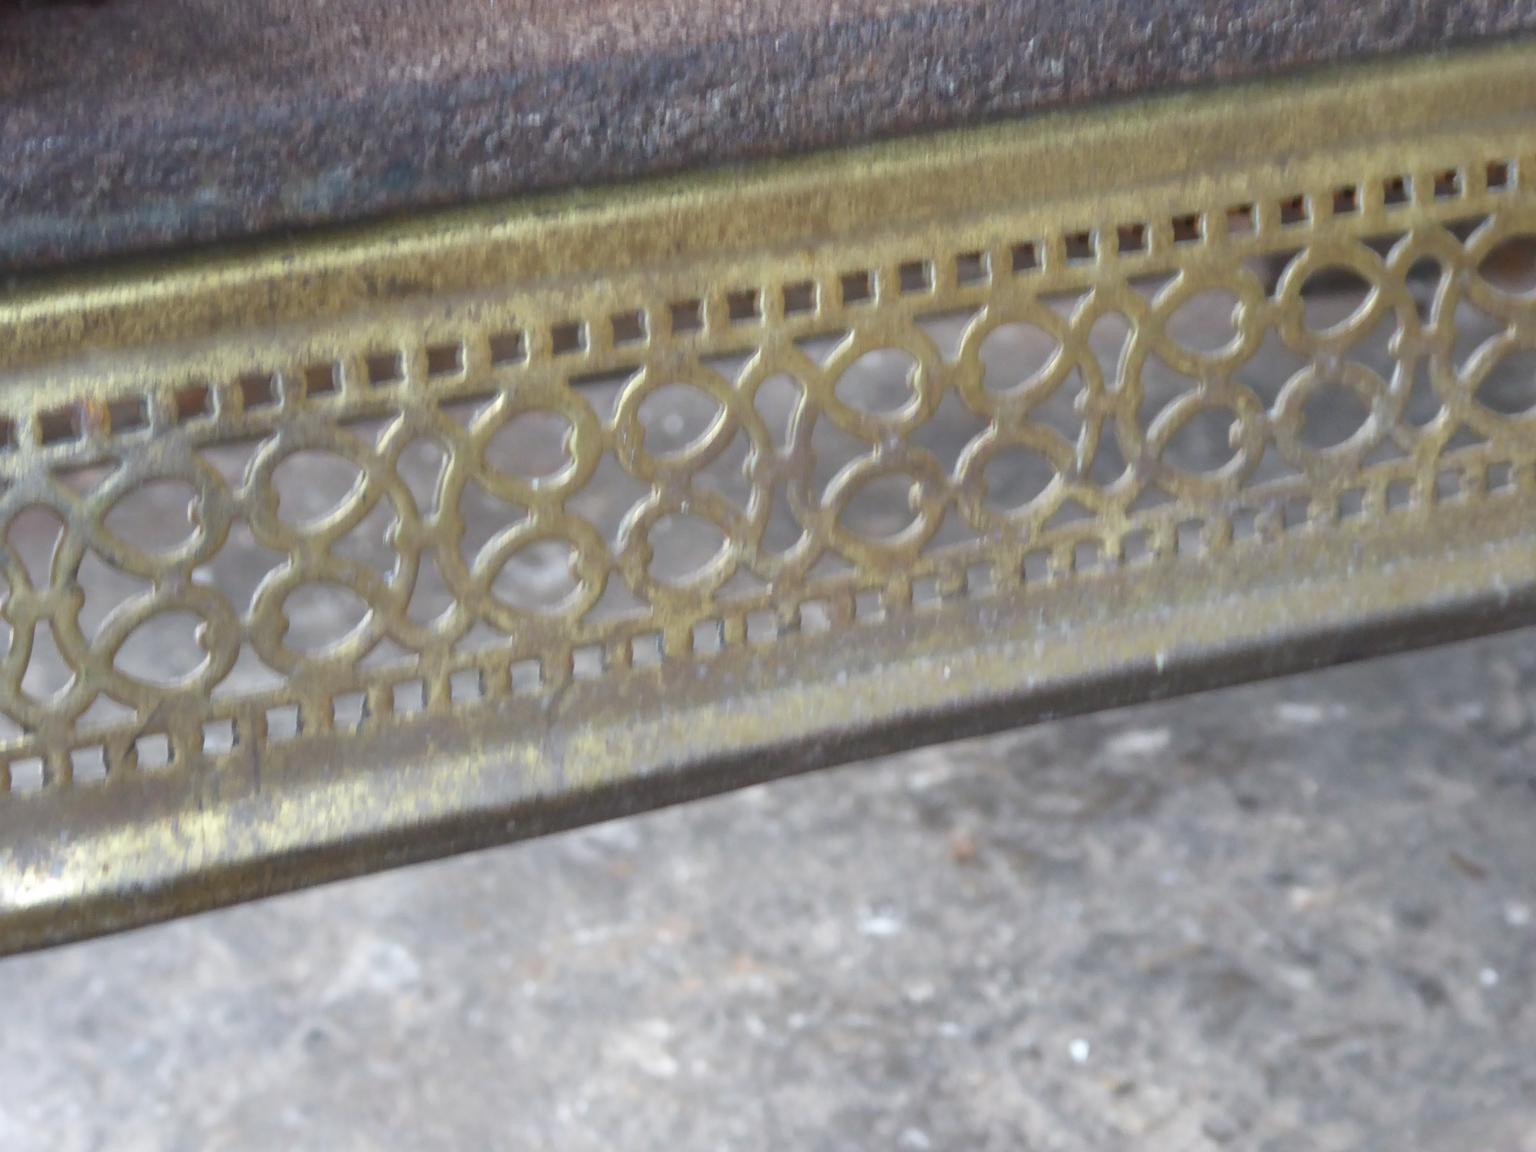 English Victorian Style Fireplace Grate, Fire Grate 1